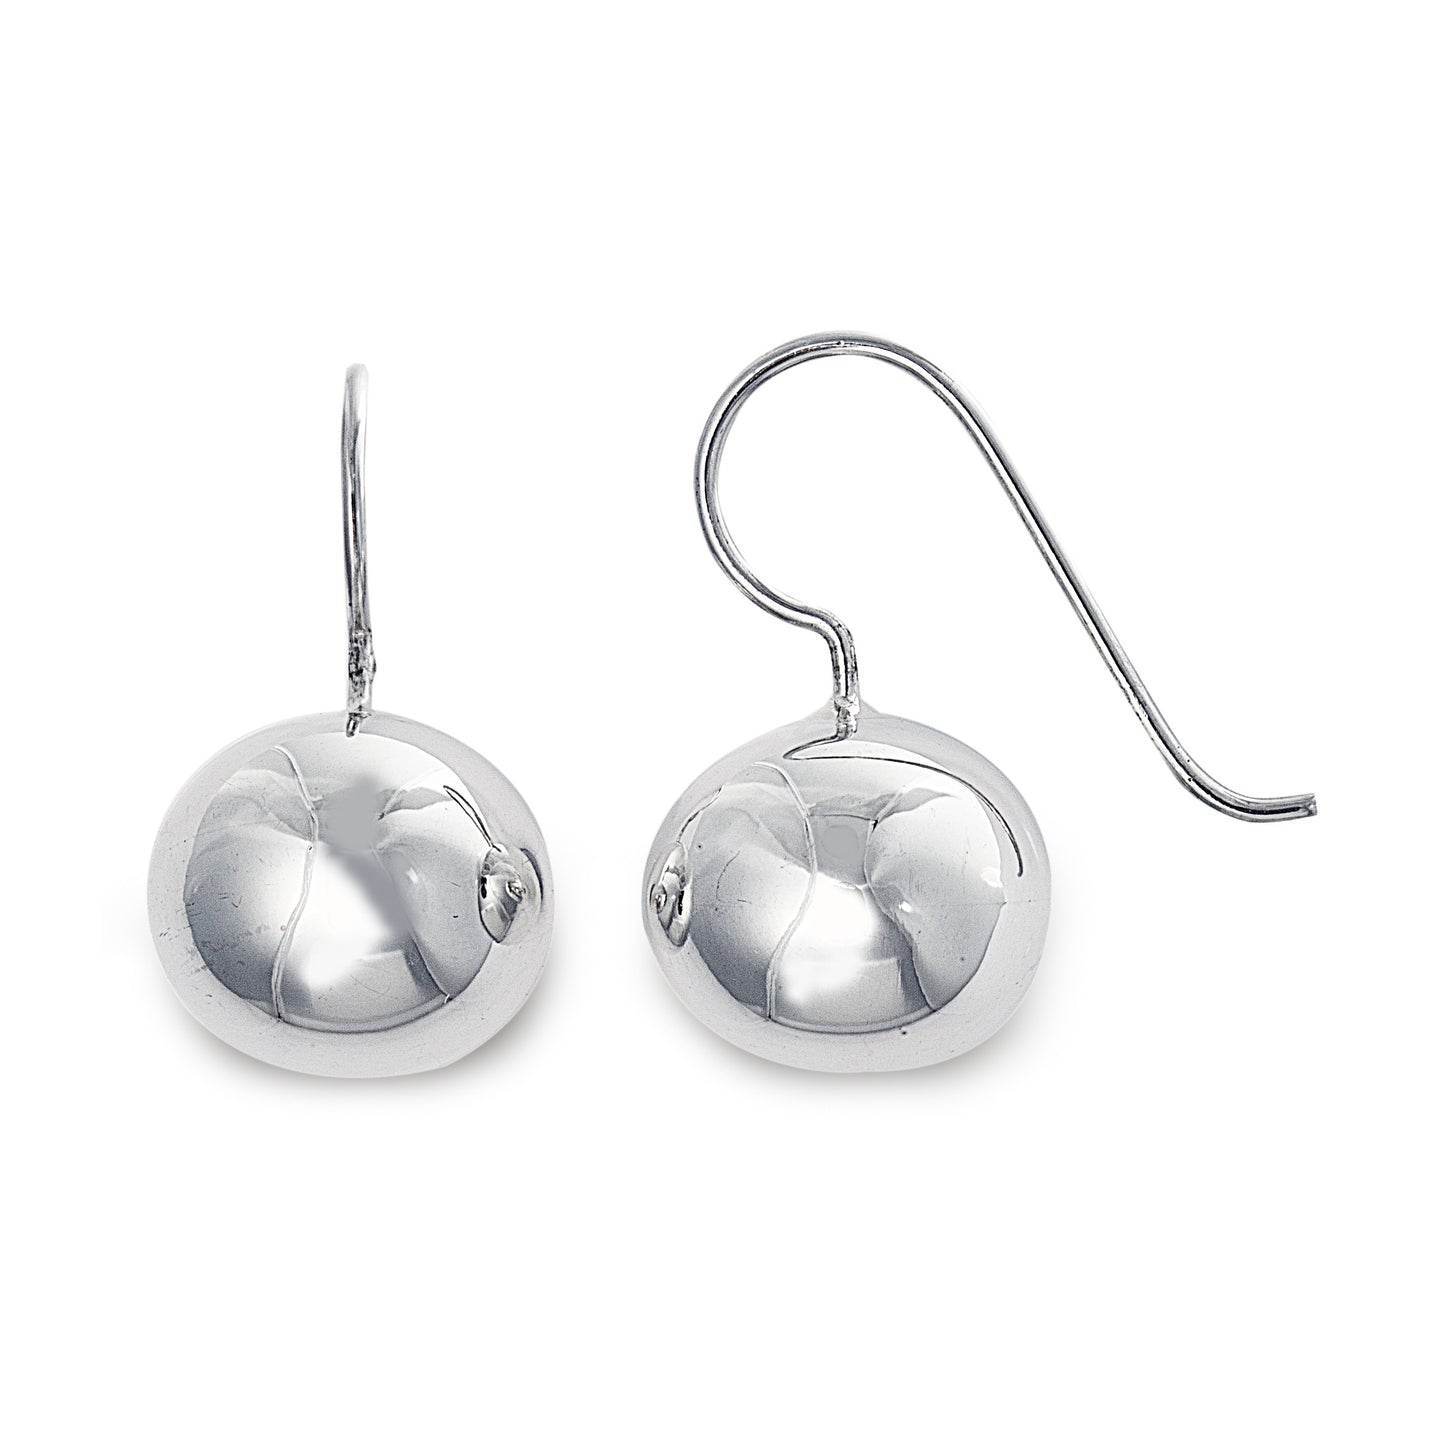 The Large Villa Drop Earrings feature extra large balls in 925 sterling silver. Size: 14mm ball diameter. Worldwide Shipping. Jewellery by Bellagio & Co.